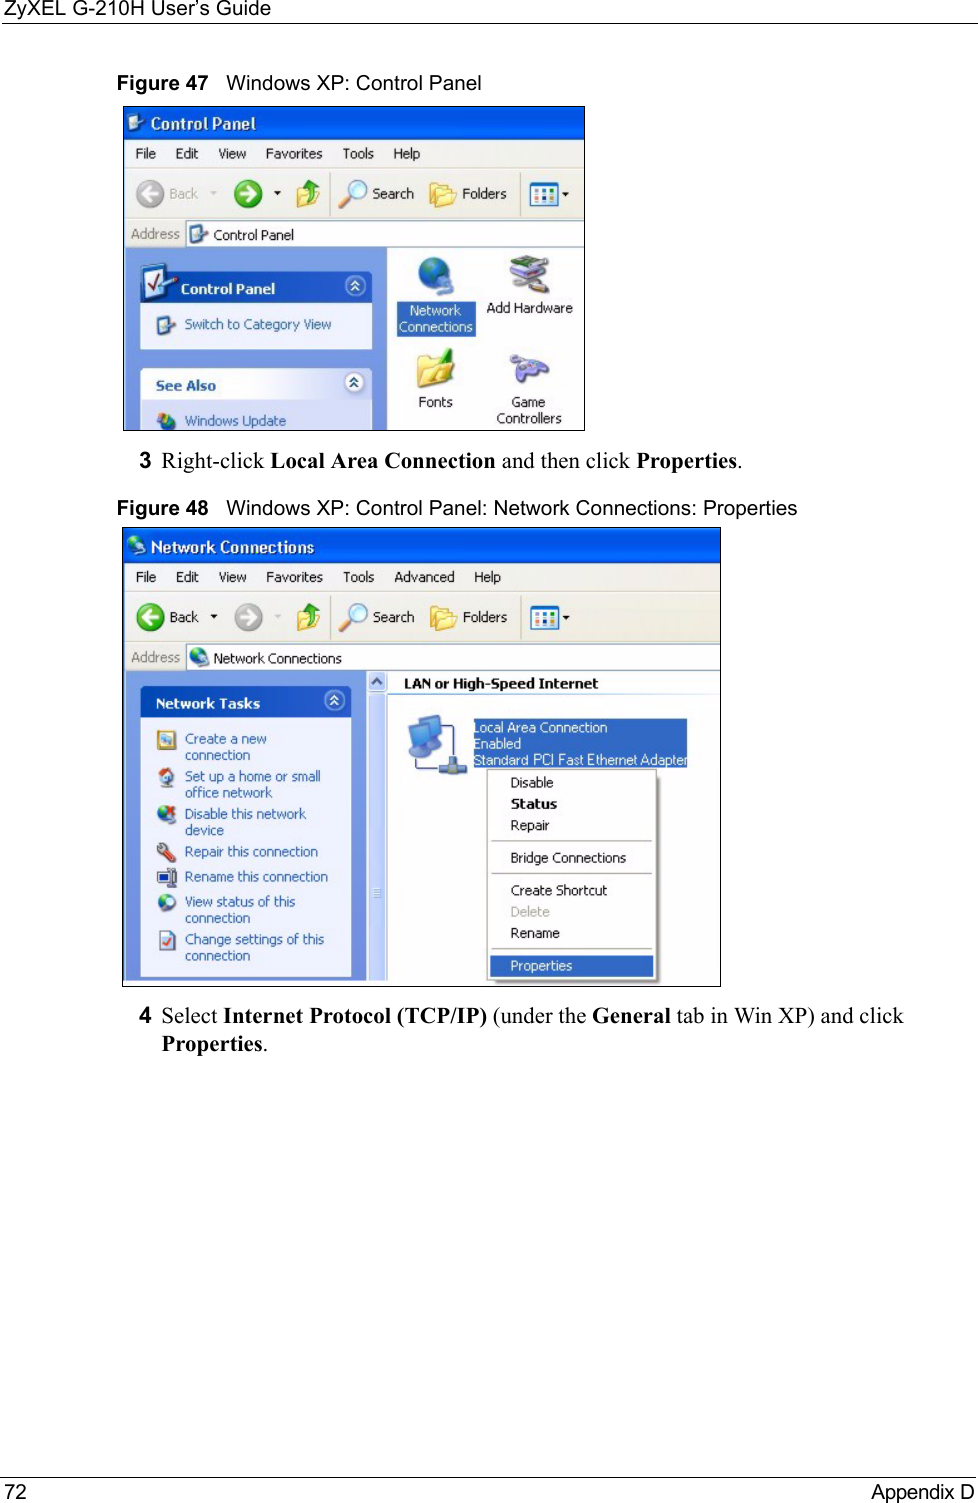 ZyXEL G-210H User’s Guide72 Appendix DFigure 47   Windows XP: Control Panel3Right-click Local Area Connection and then click Properties.Figure 48   Windows XP: Control Panel: Network Connections: Properties4Select Internet Protocol (TCP/IP) (under the General tab in Win XP) and click Properties.